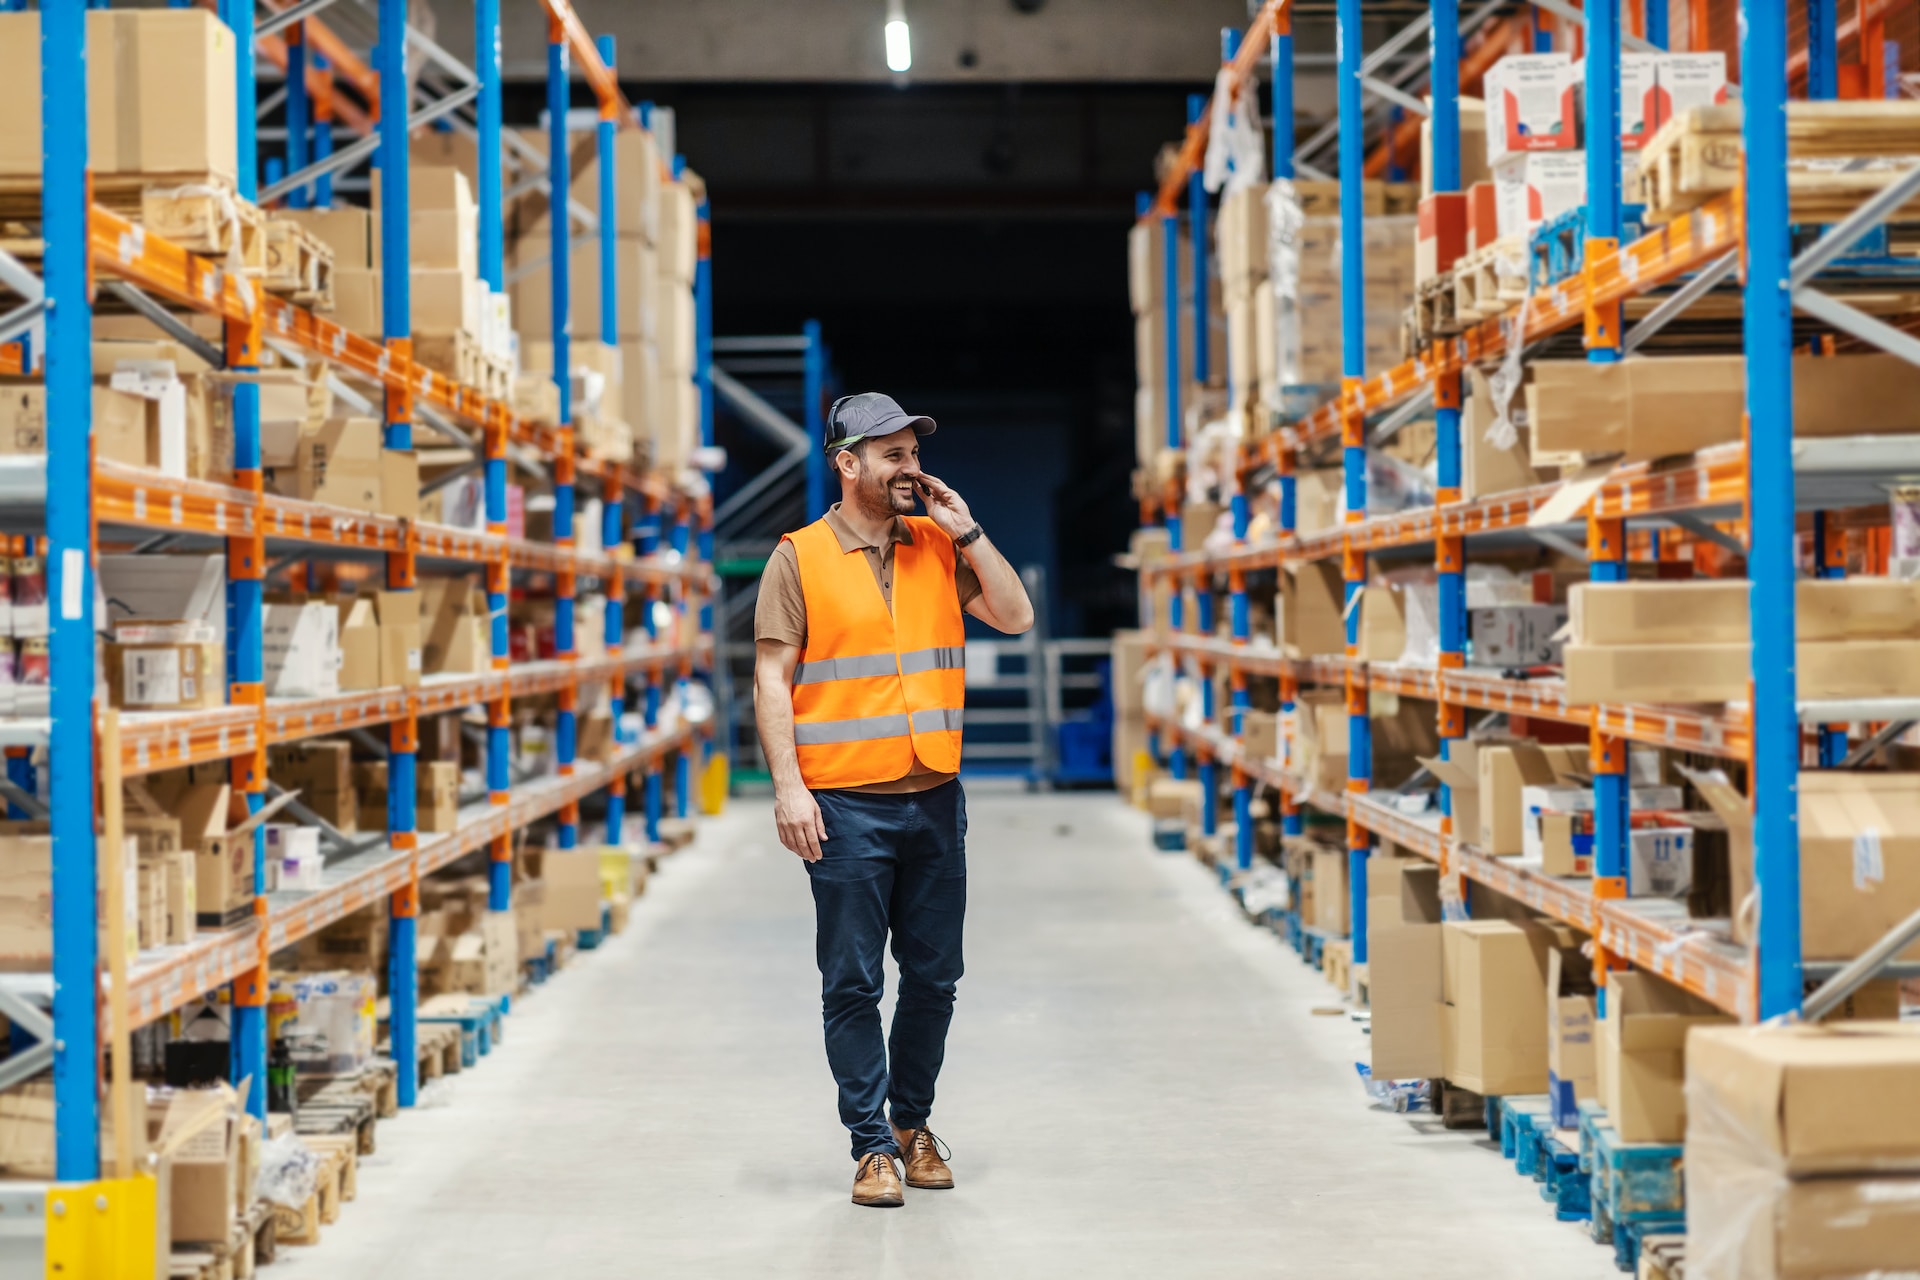 5 Ways to Increase Warehouse Safety